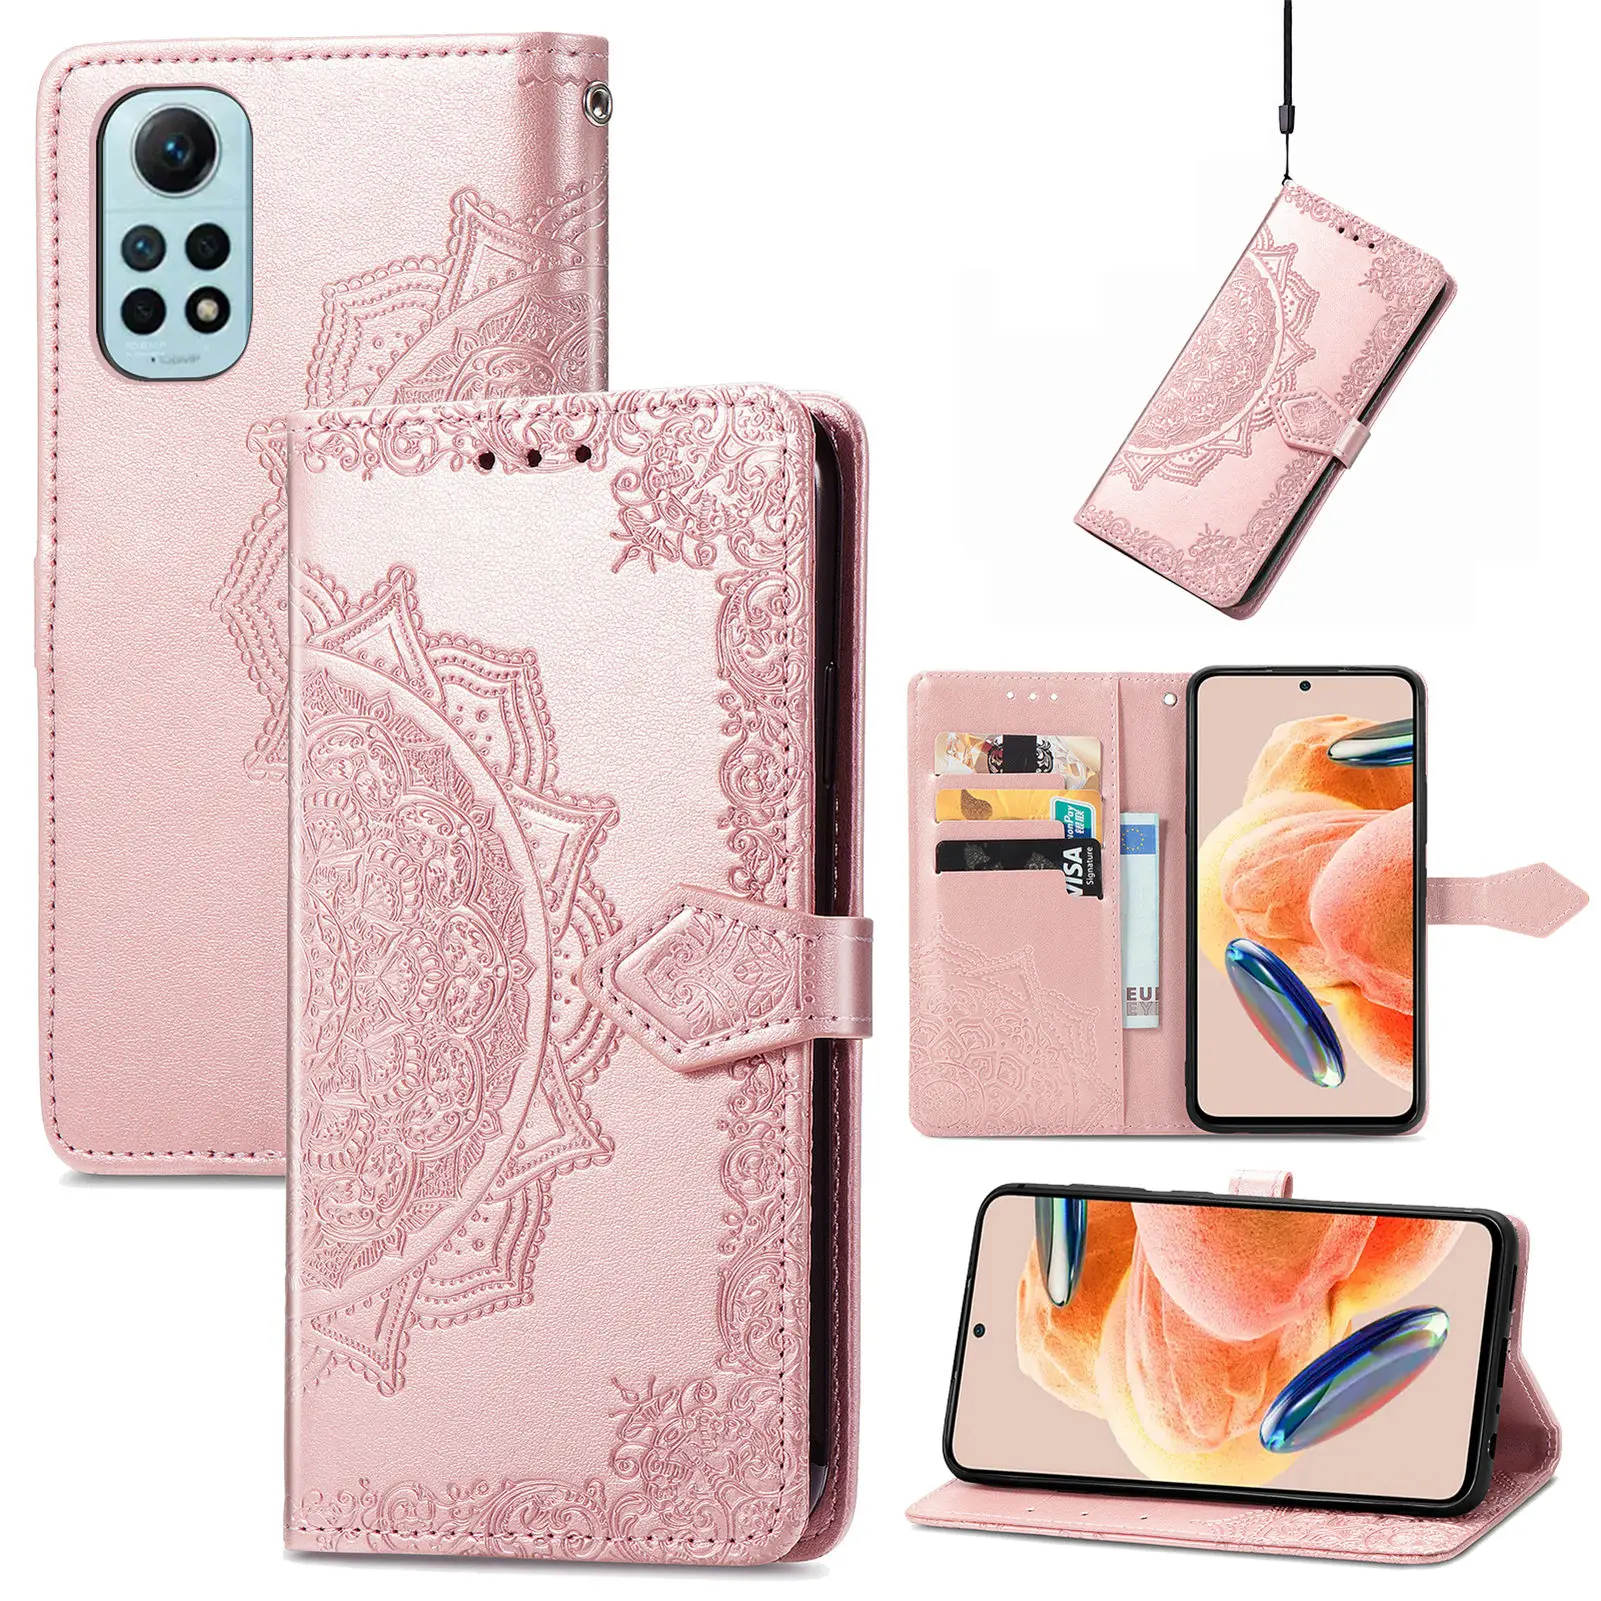 

Phone Case For Redmi Note 12 Wallet Card Slot Flap With Lanyard Protective Leather Cover For Redmi 12c 10 9 9a 8 7 A2 A1 Plus